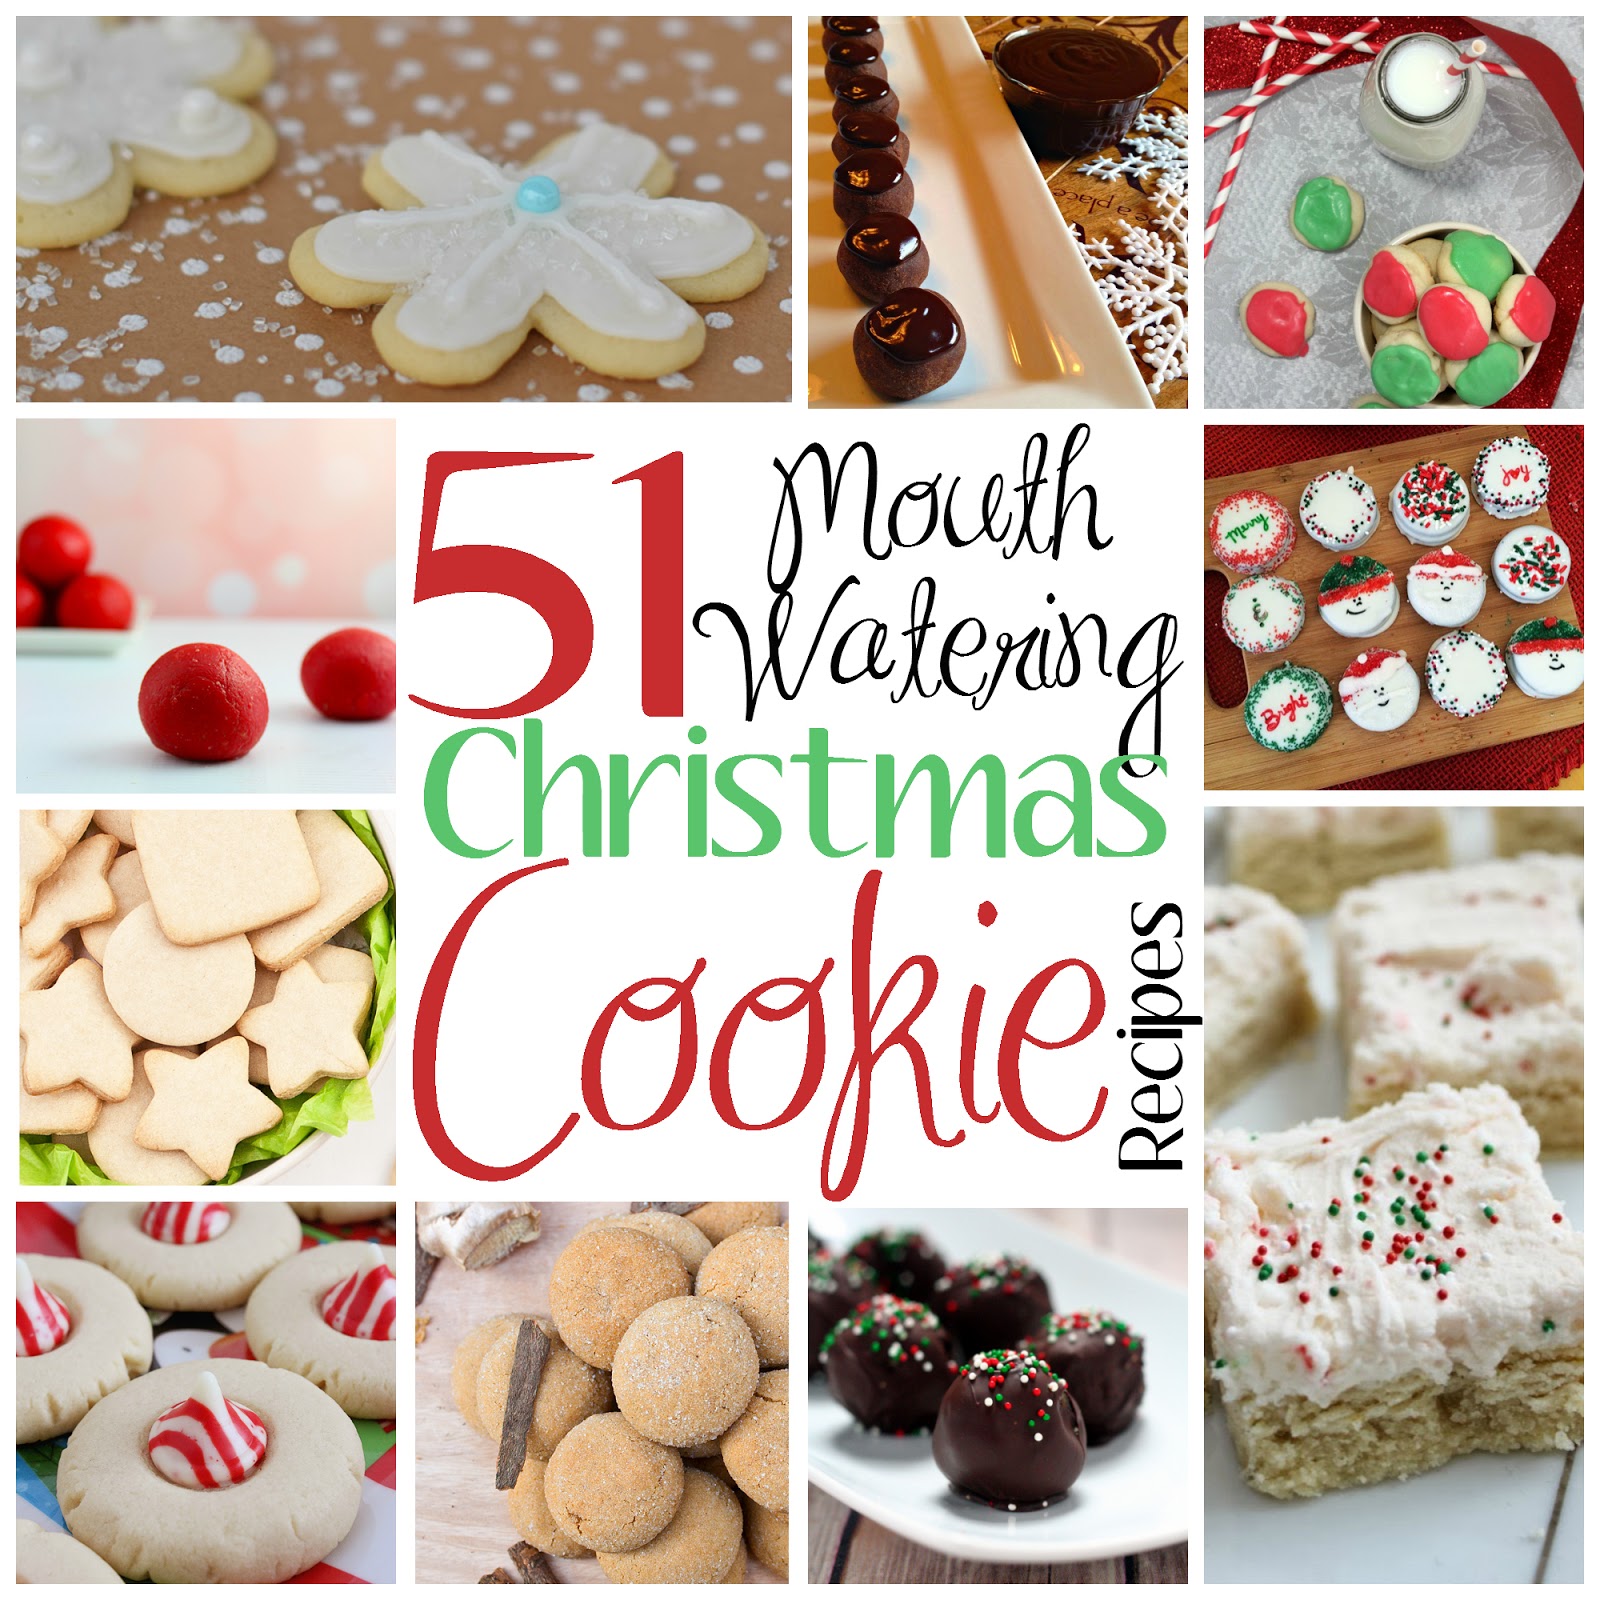 51 Mouth Watering Christmas Cookie Recipes Part 1 - Mom ...